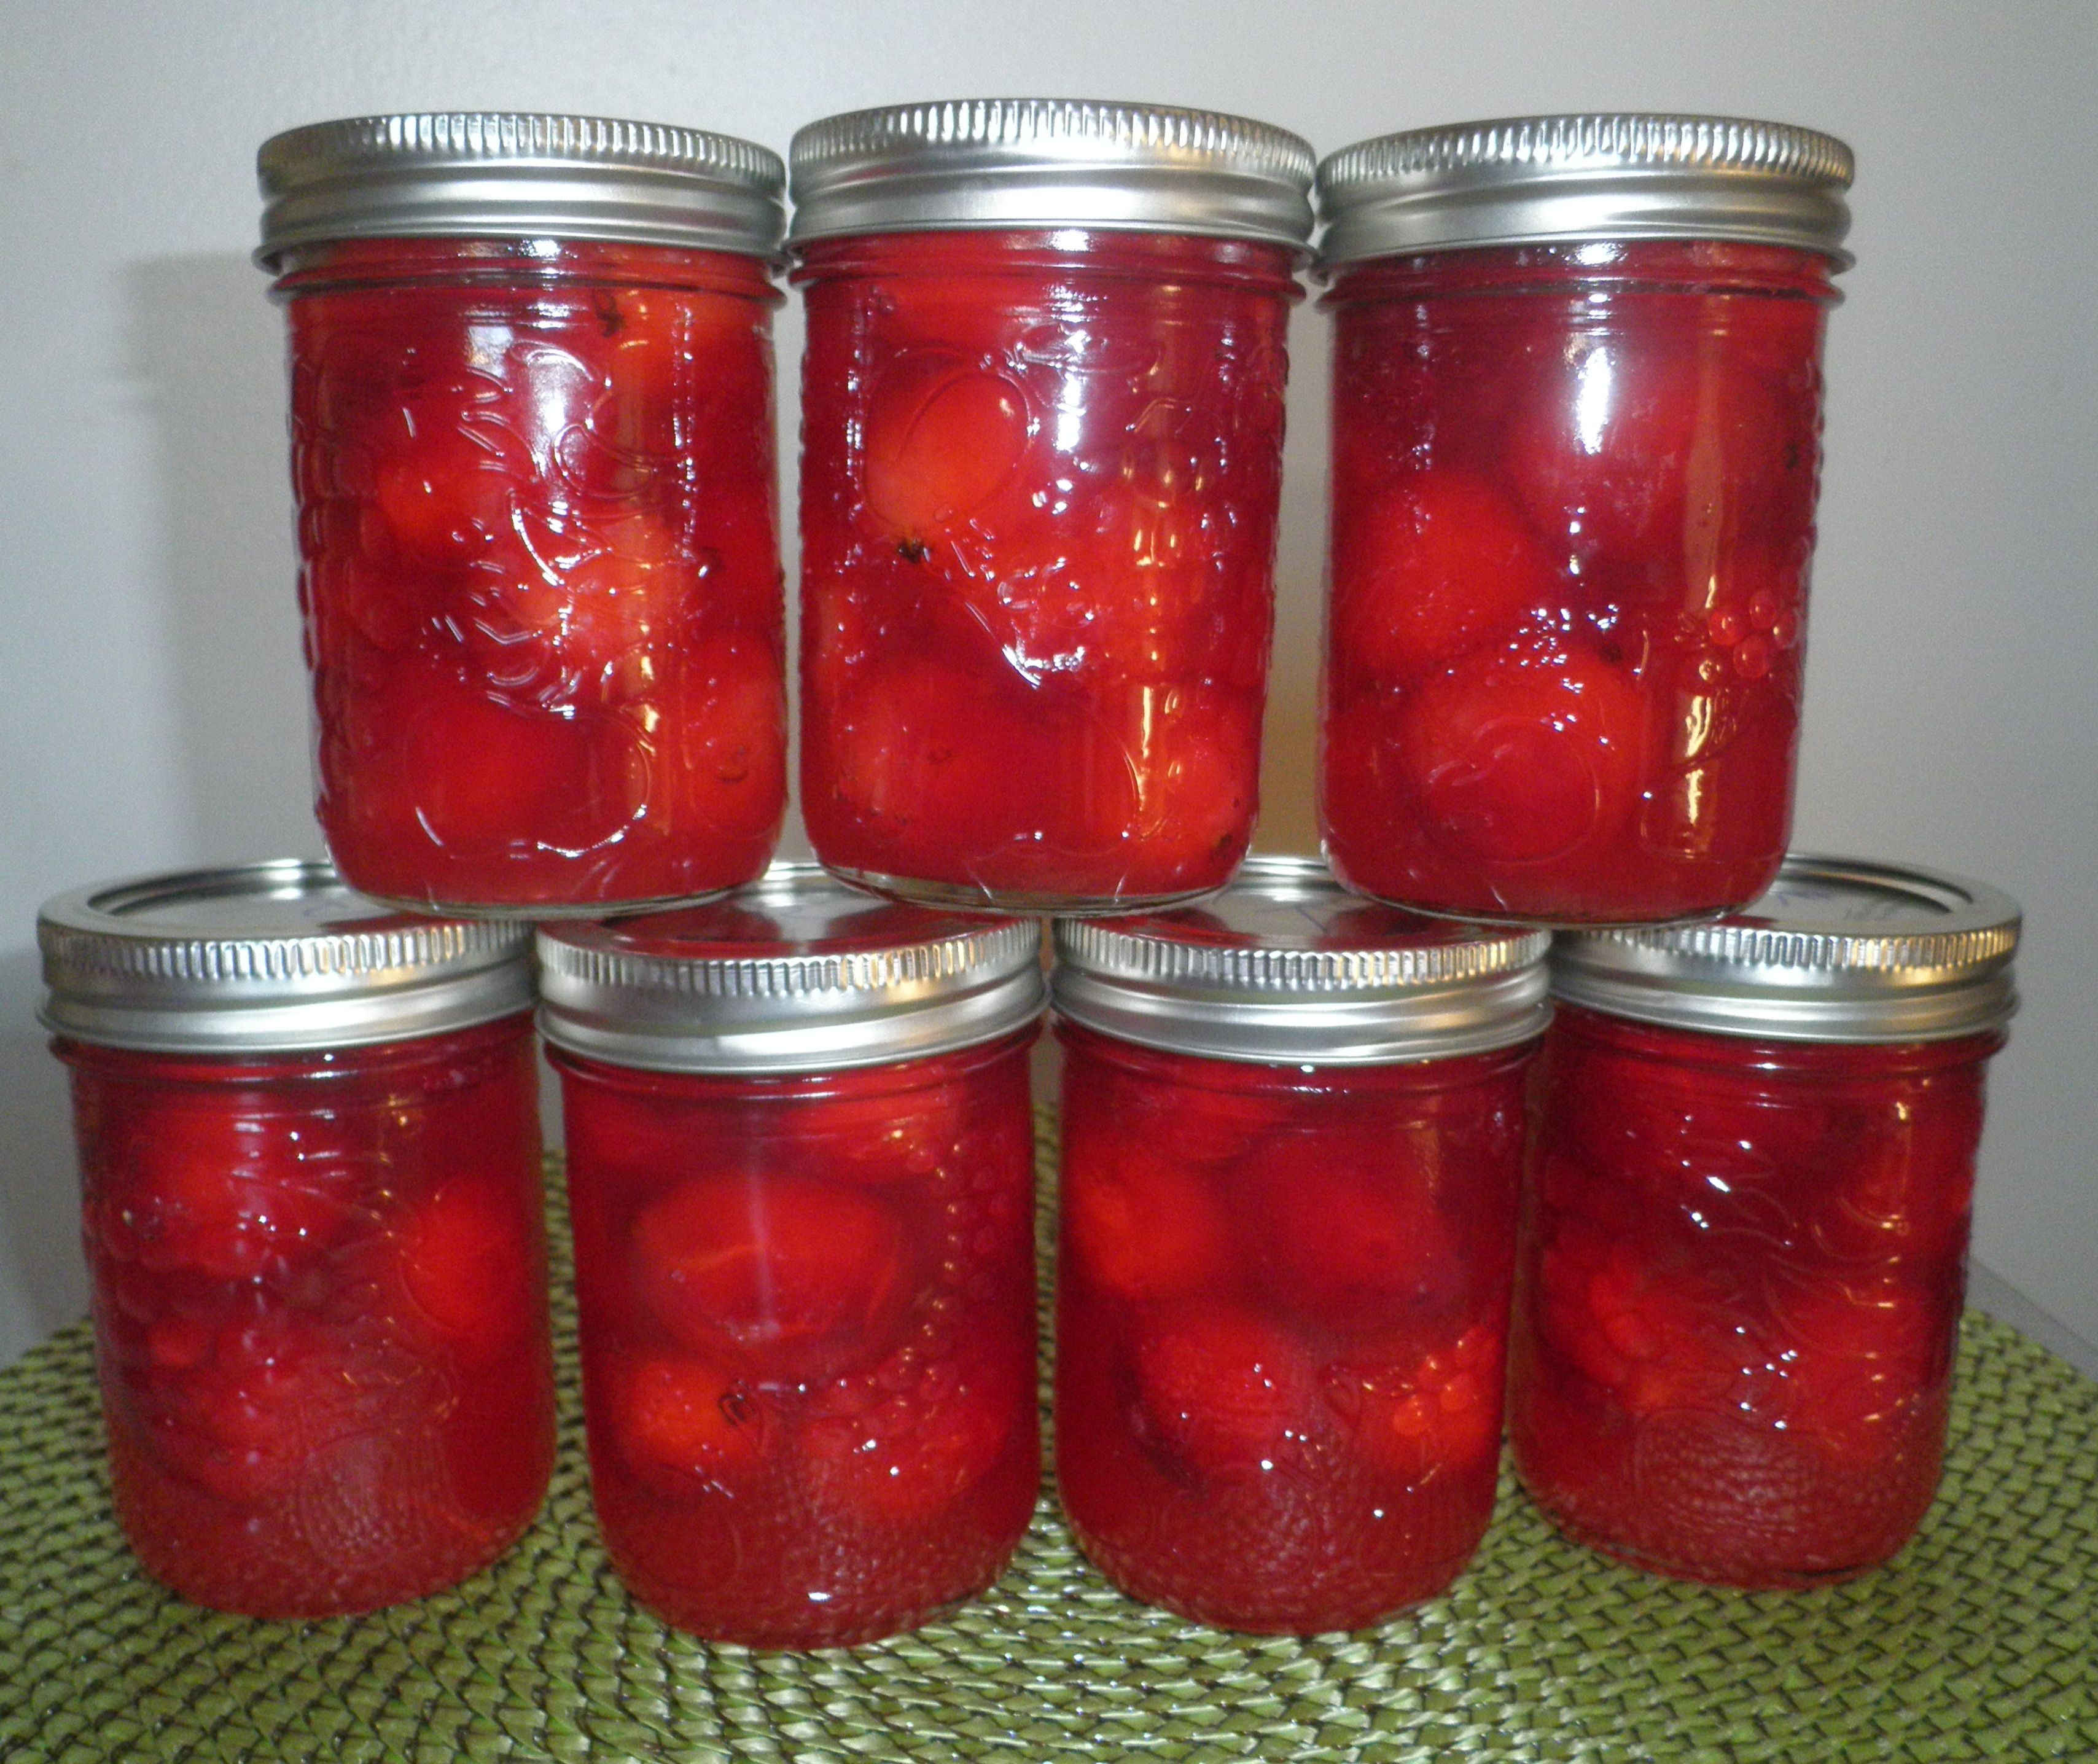 Whole Canned Crabapples image